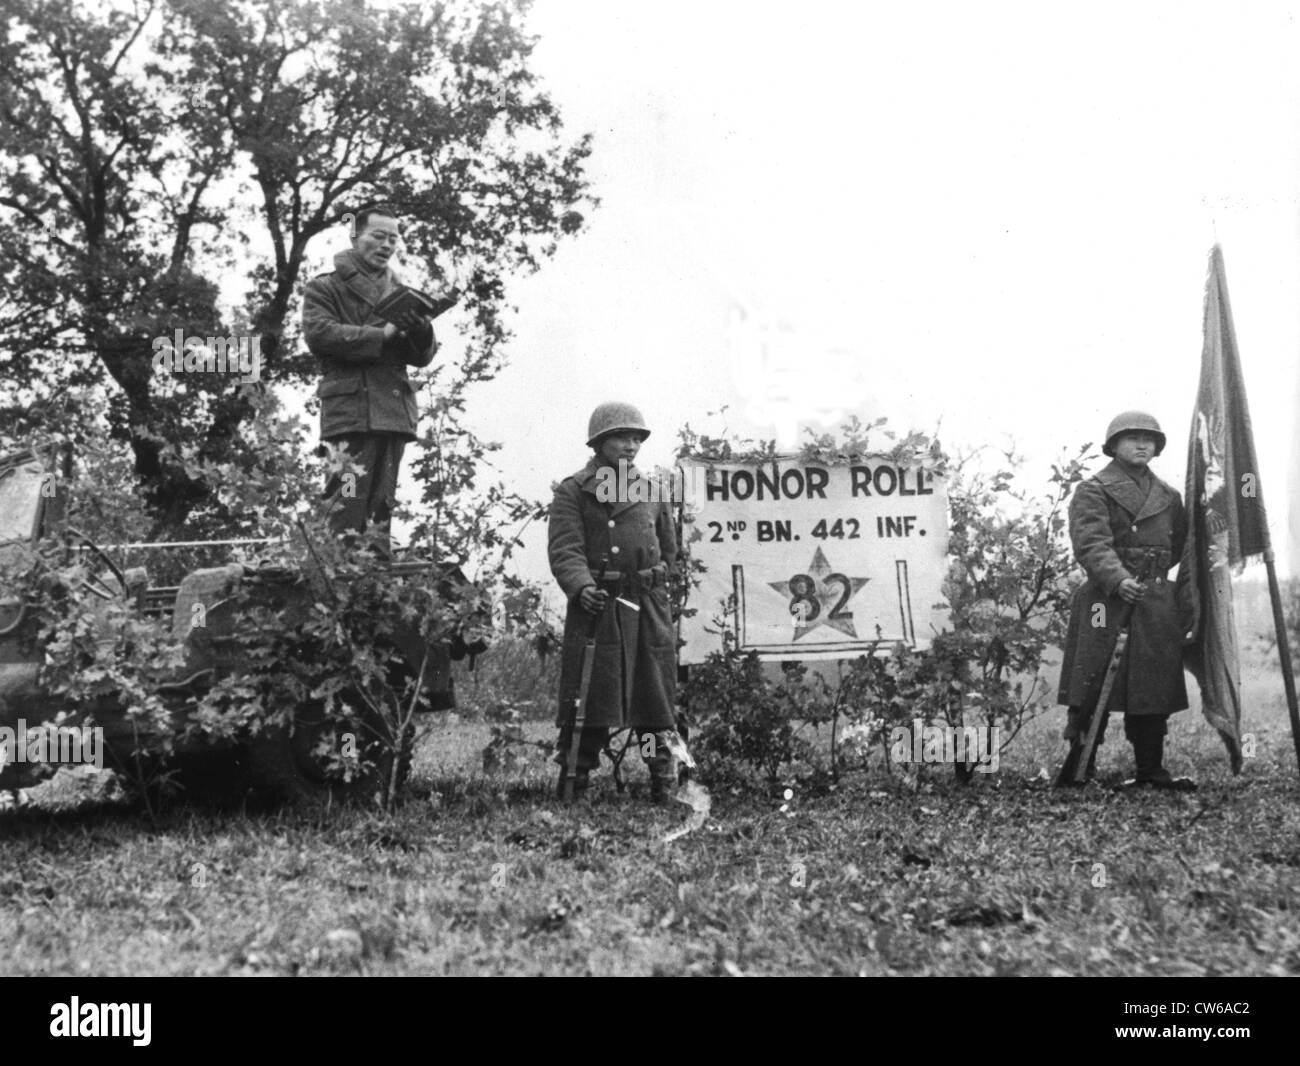 Tribute paid to fallen Americans by U.S soldiers Japanese descent (Eastern France) November 11, 1944 Stock Photo